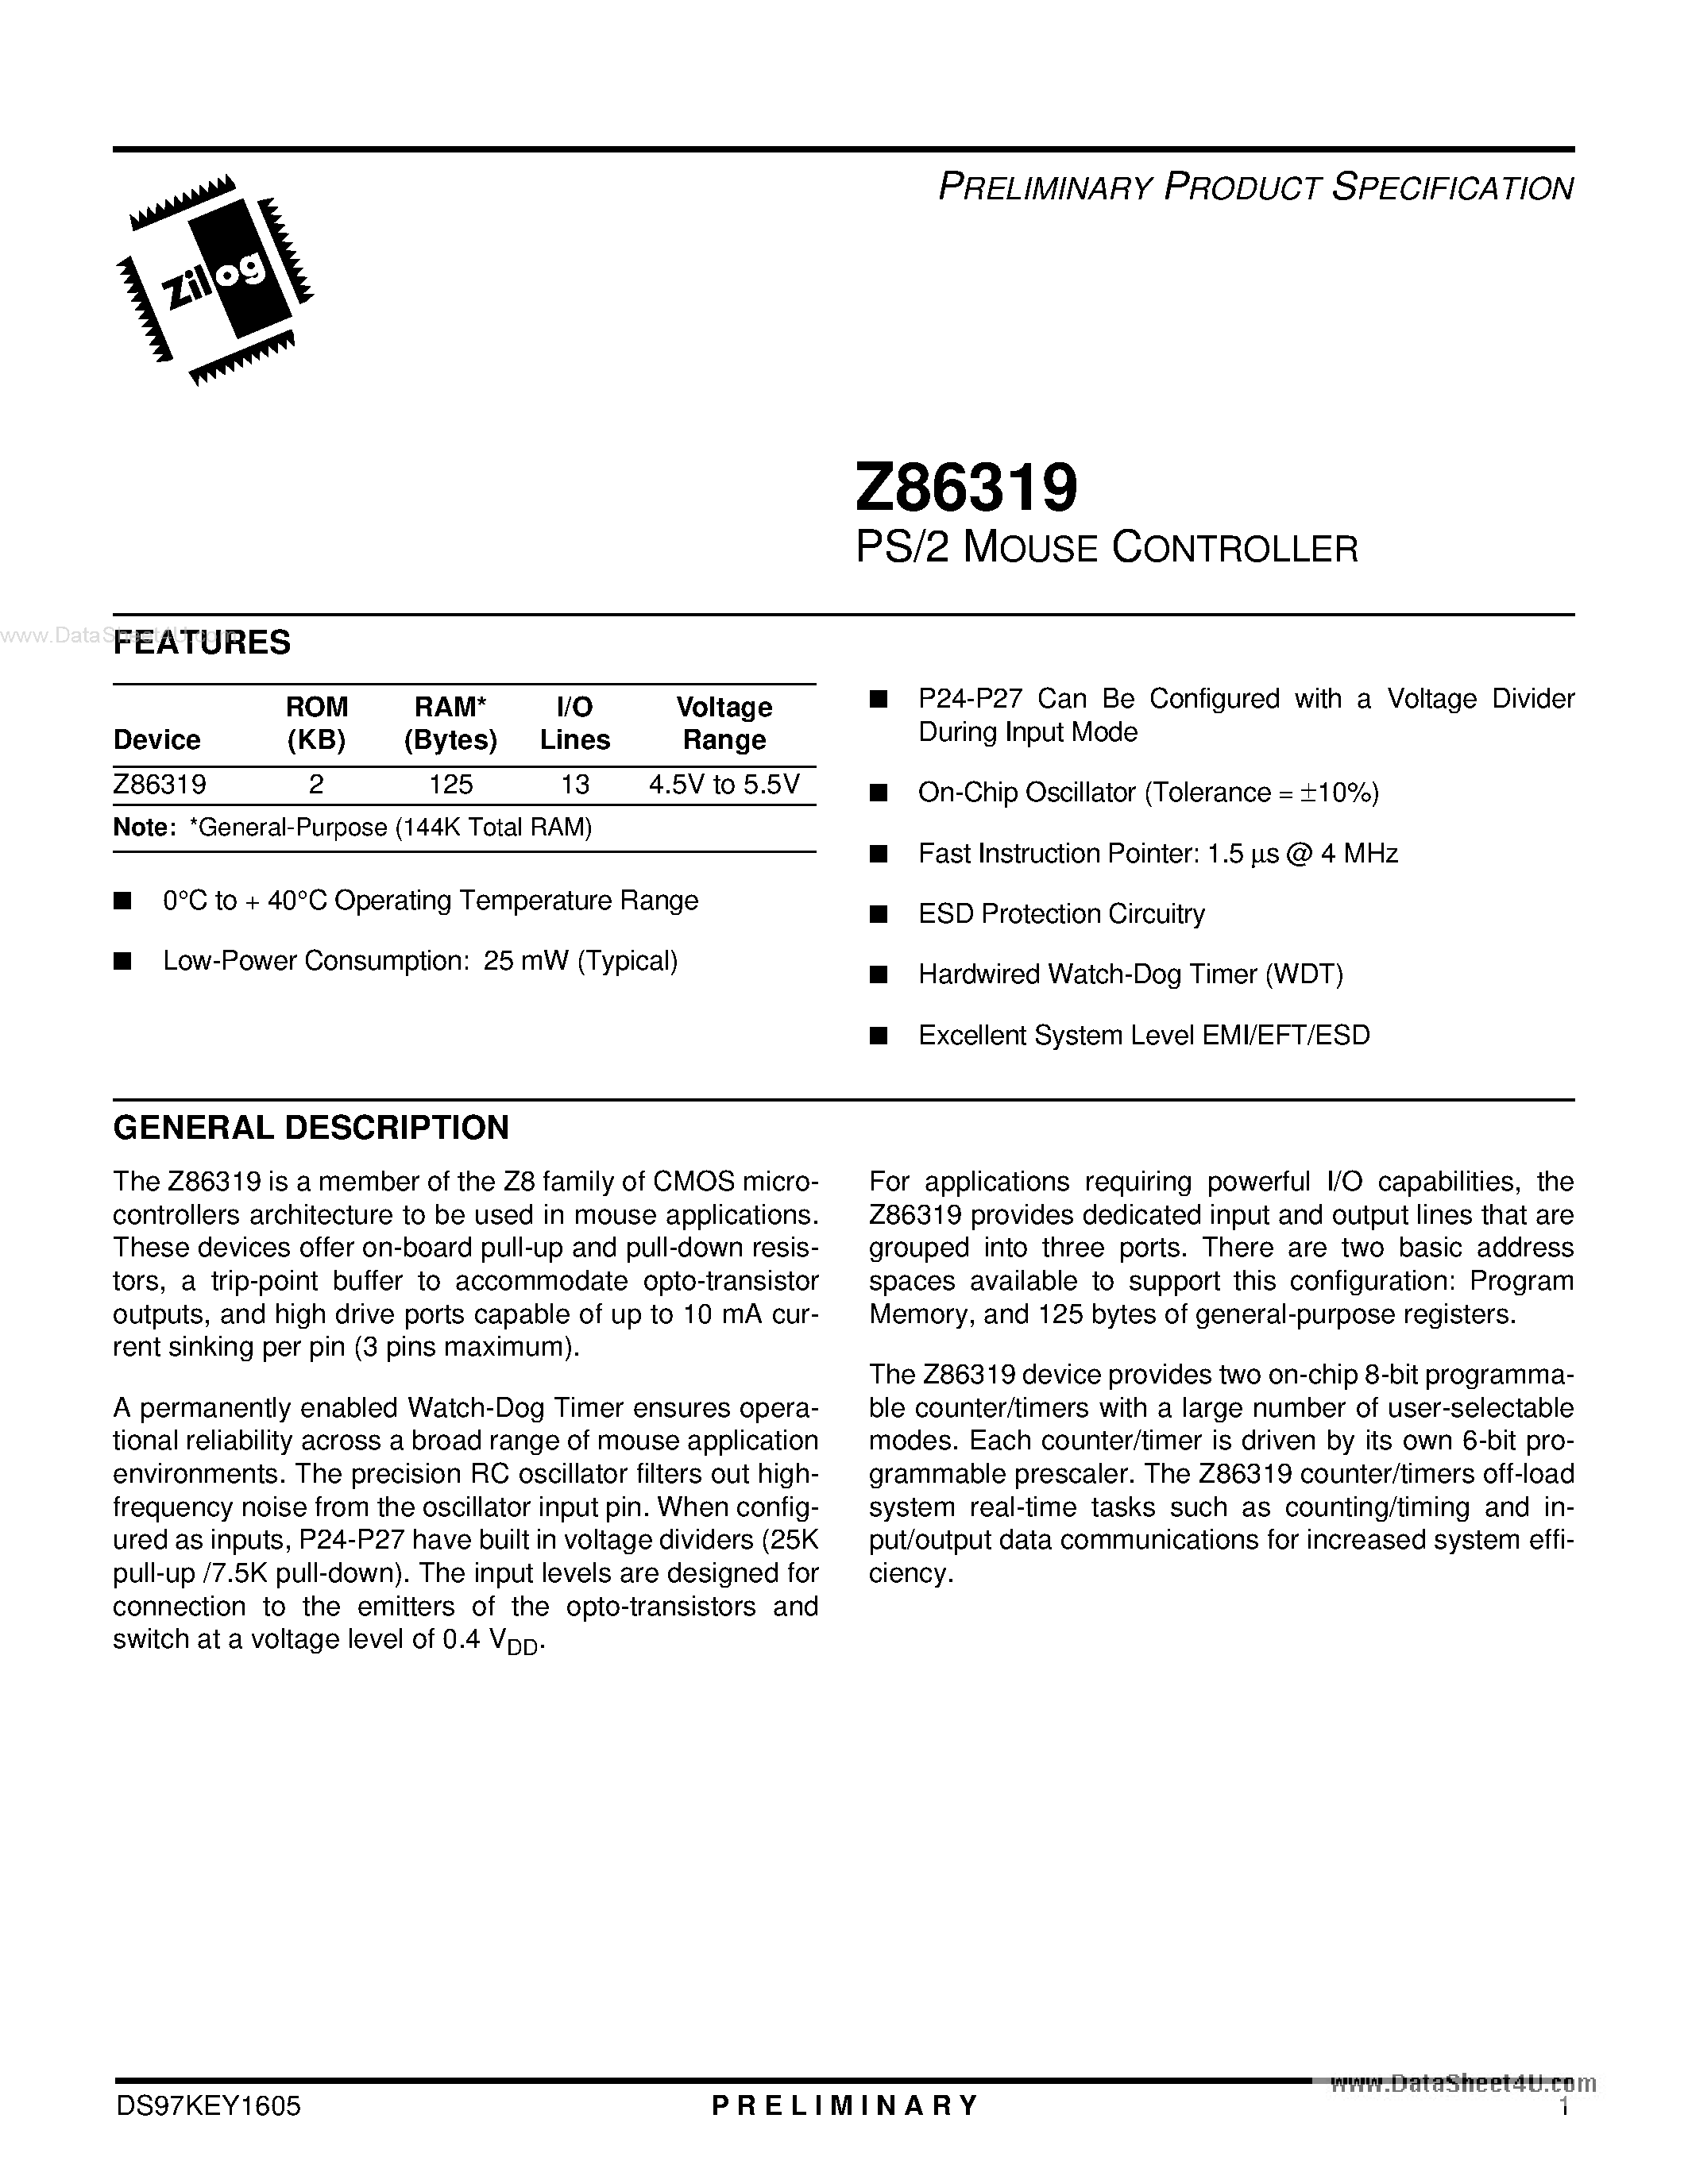 Datasheet Z86319 - PS/2 MOUSE CONTROLLER page 1